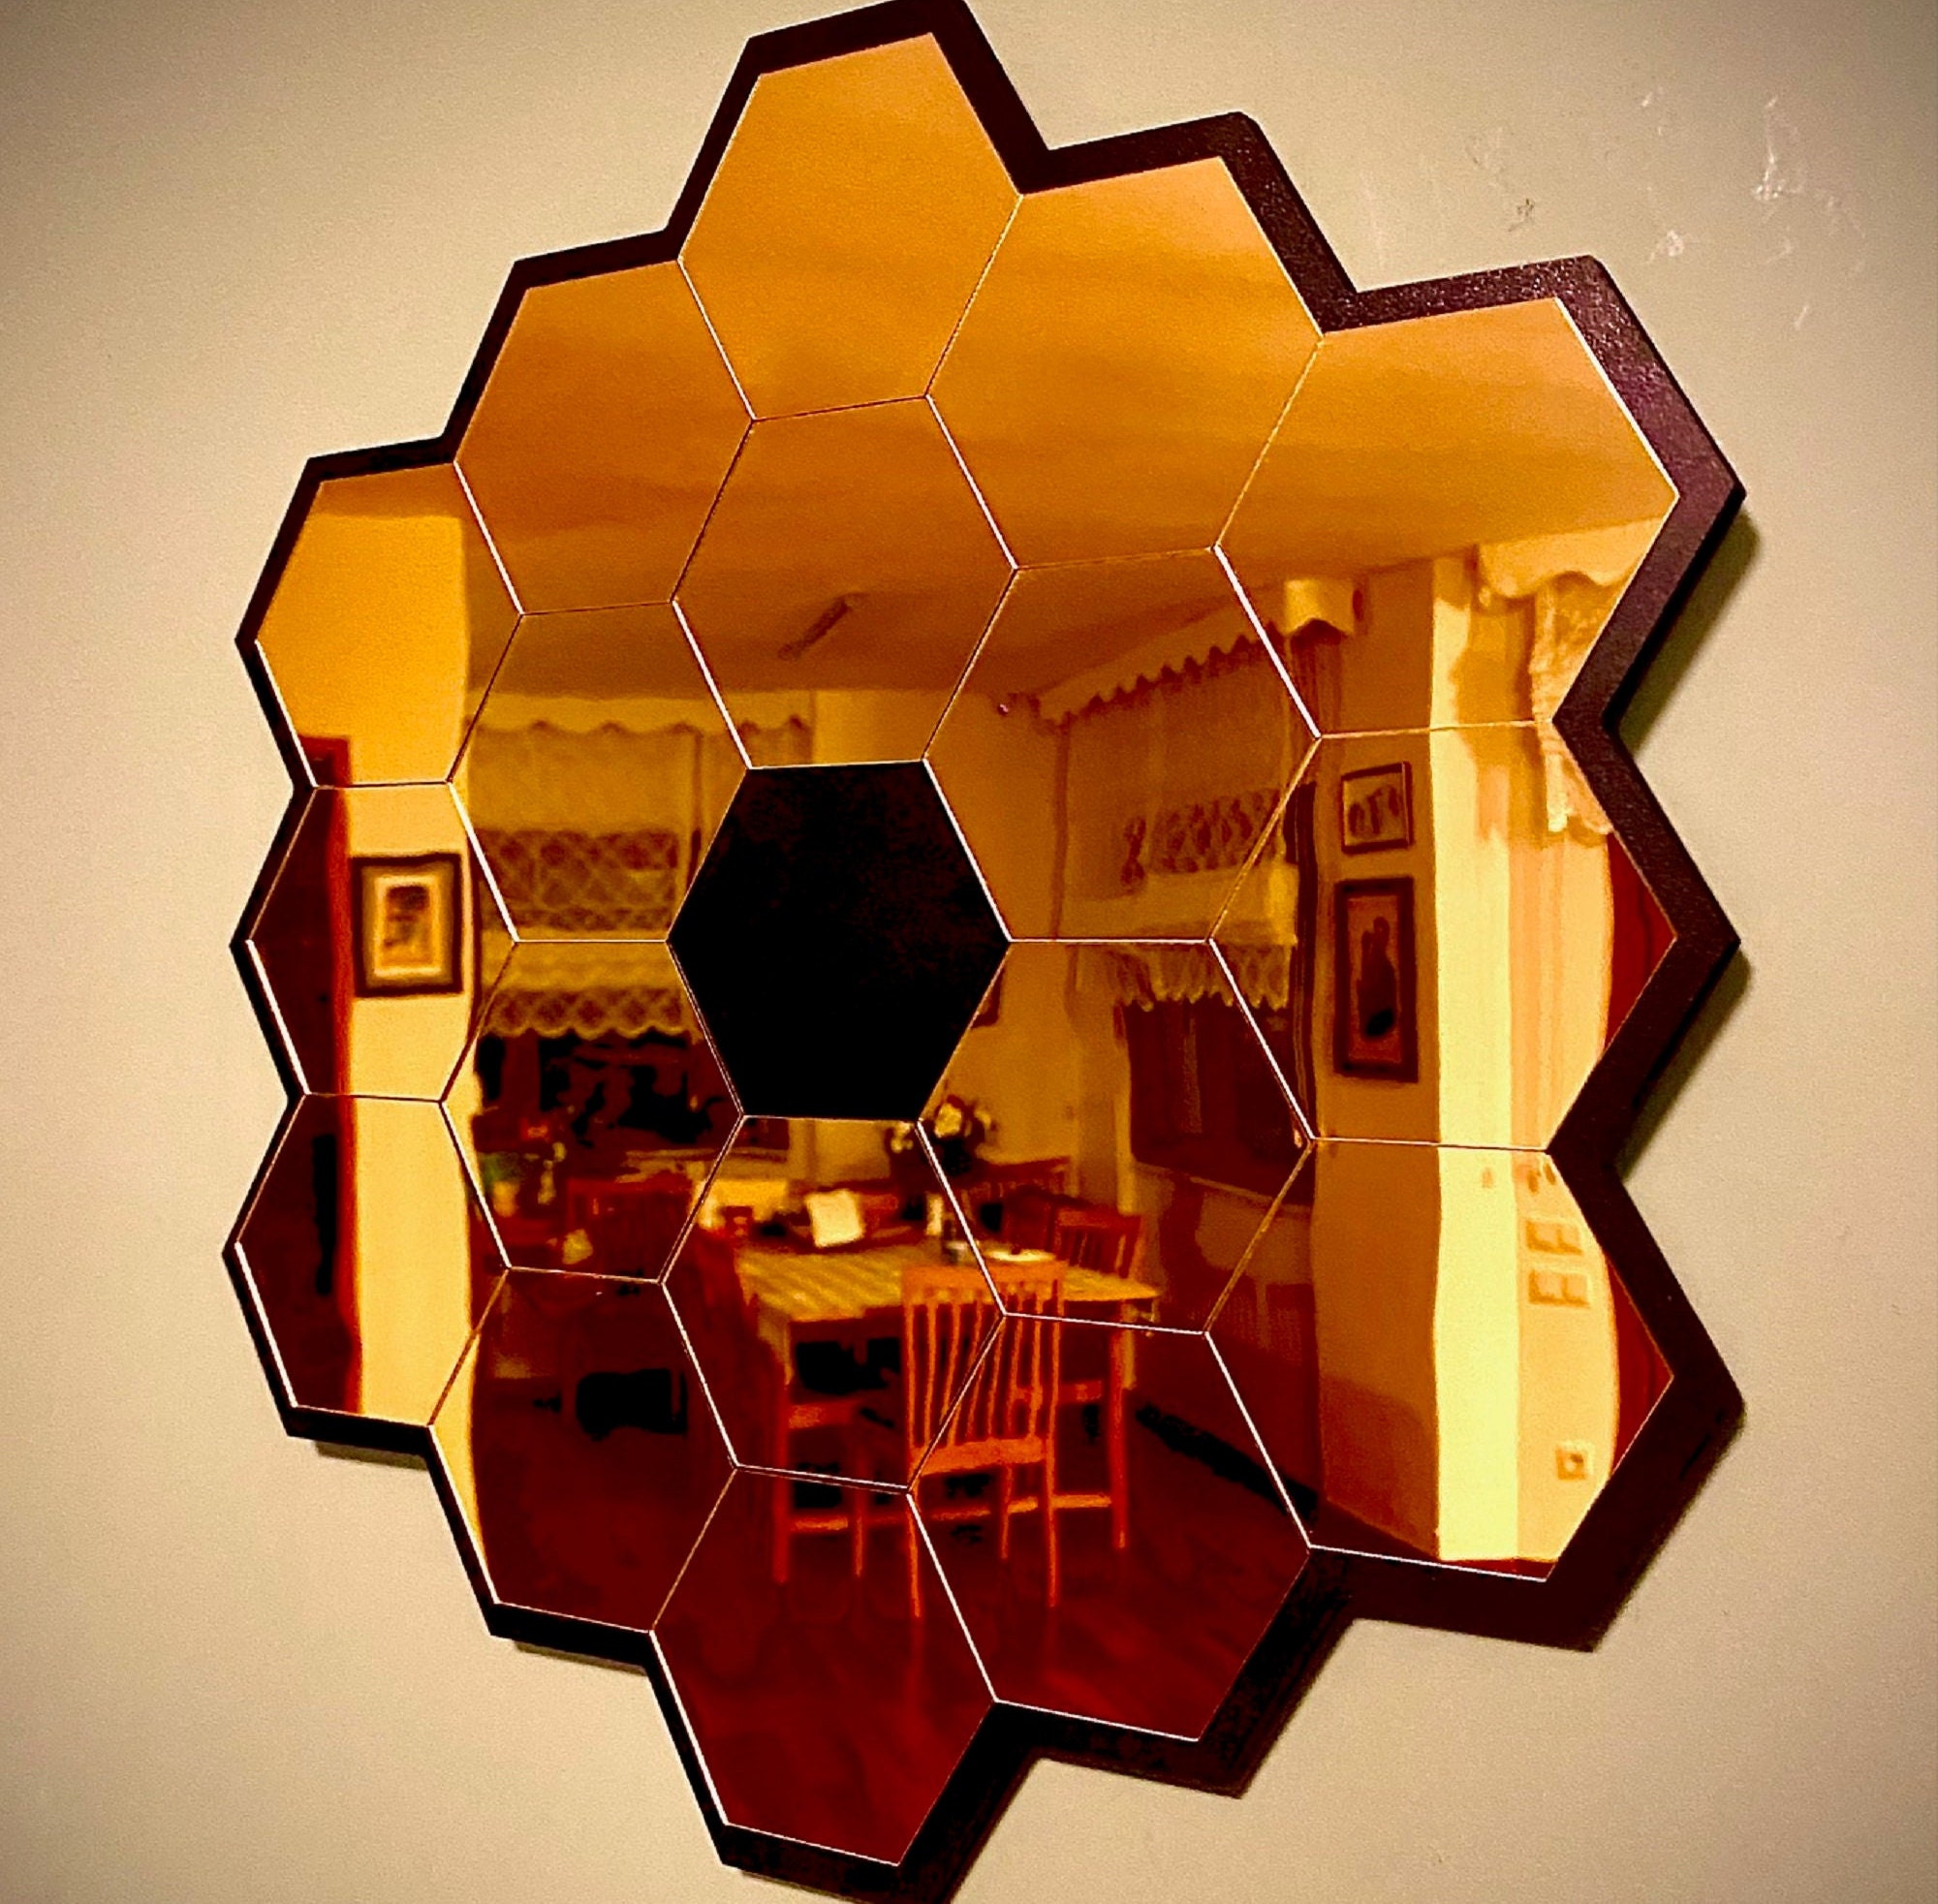 Pianpianzi Hexagon Mirrors for Wall on Vintage Things Stick Decorative  Letters for Shelf Rose Sticker Art Decal Home Wall Happy Easter Room DIY  Eggs Decor Home Decor 